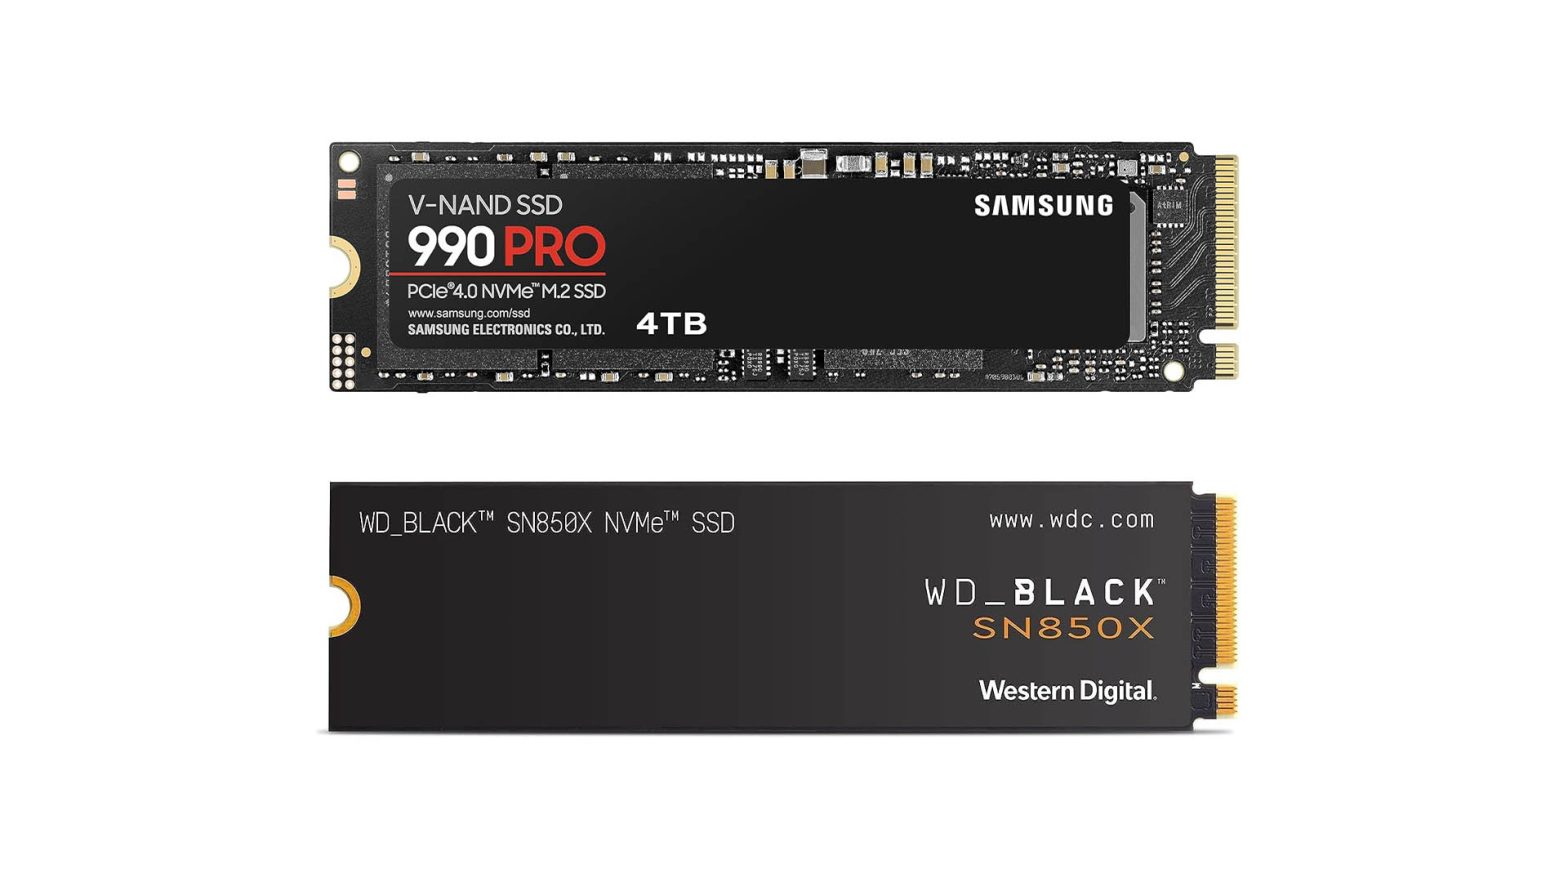 Samsung 990 PRO and WD_BLACK SN850X 4TB PCIe Gen 4 SSD are up to 57 percent off on Amazon